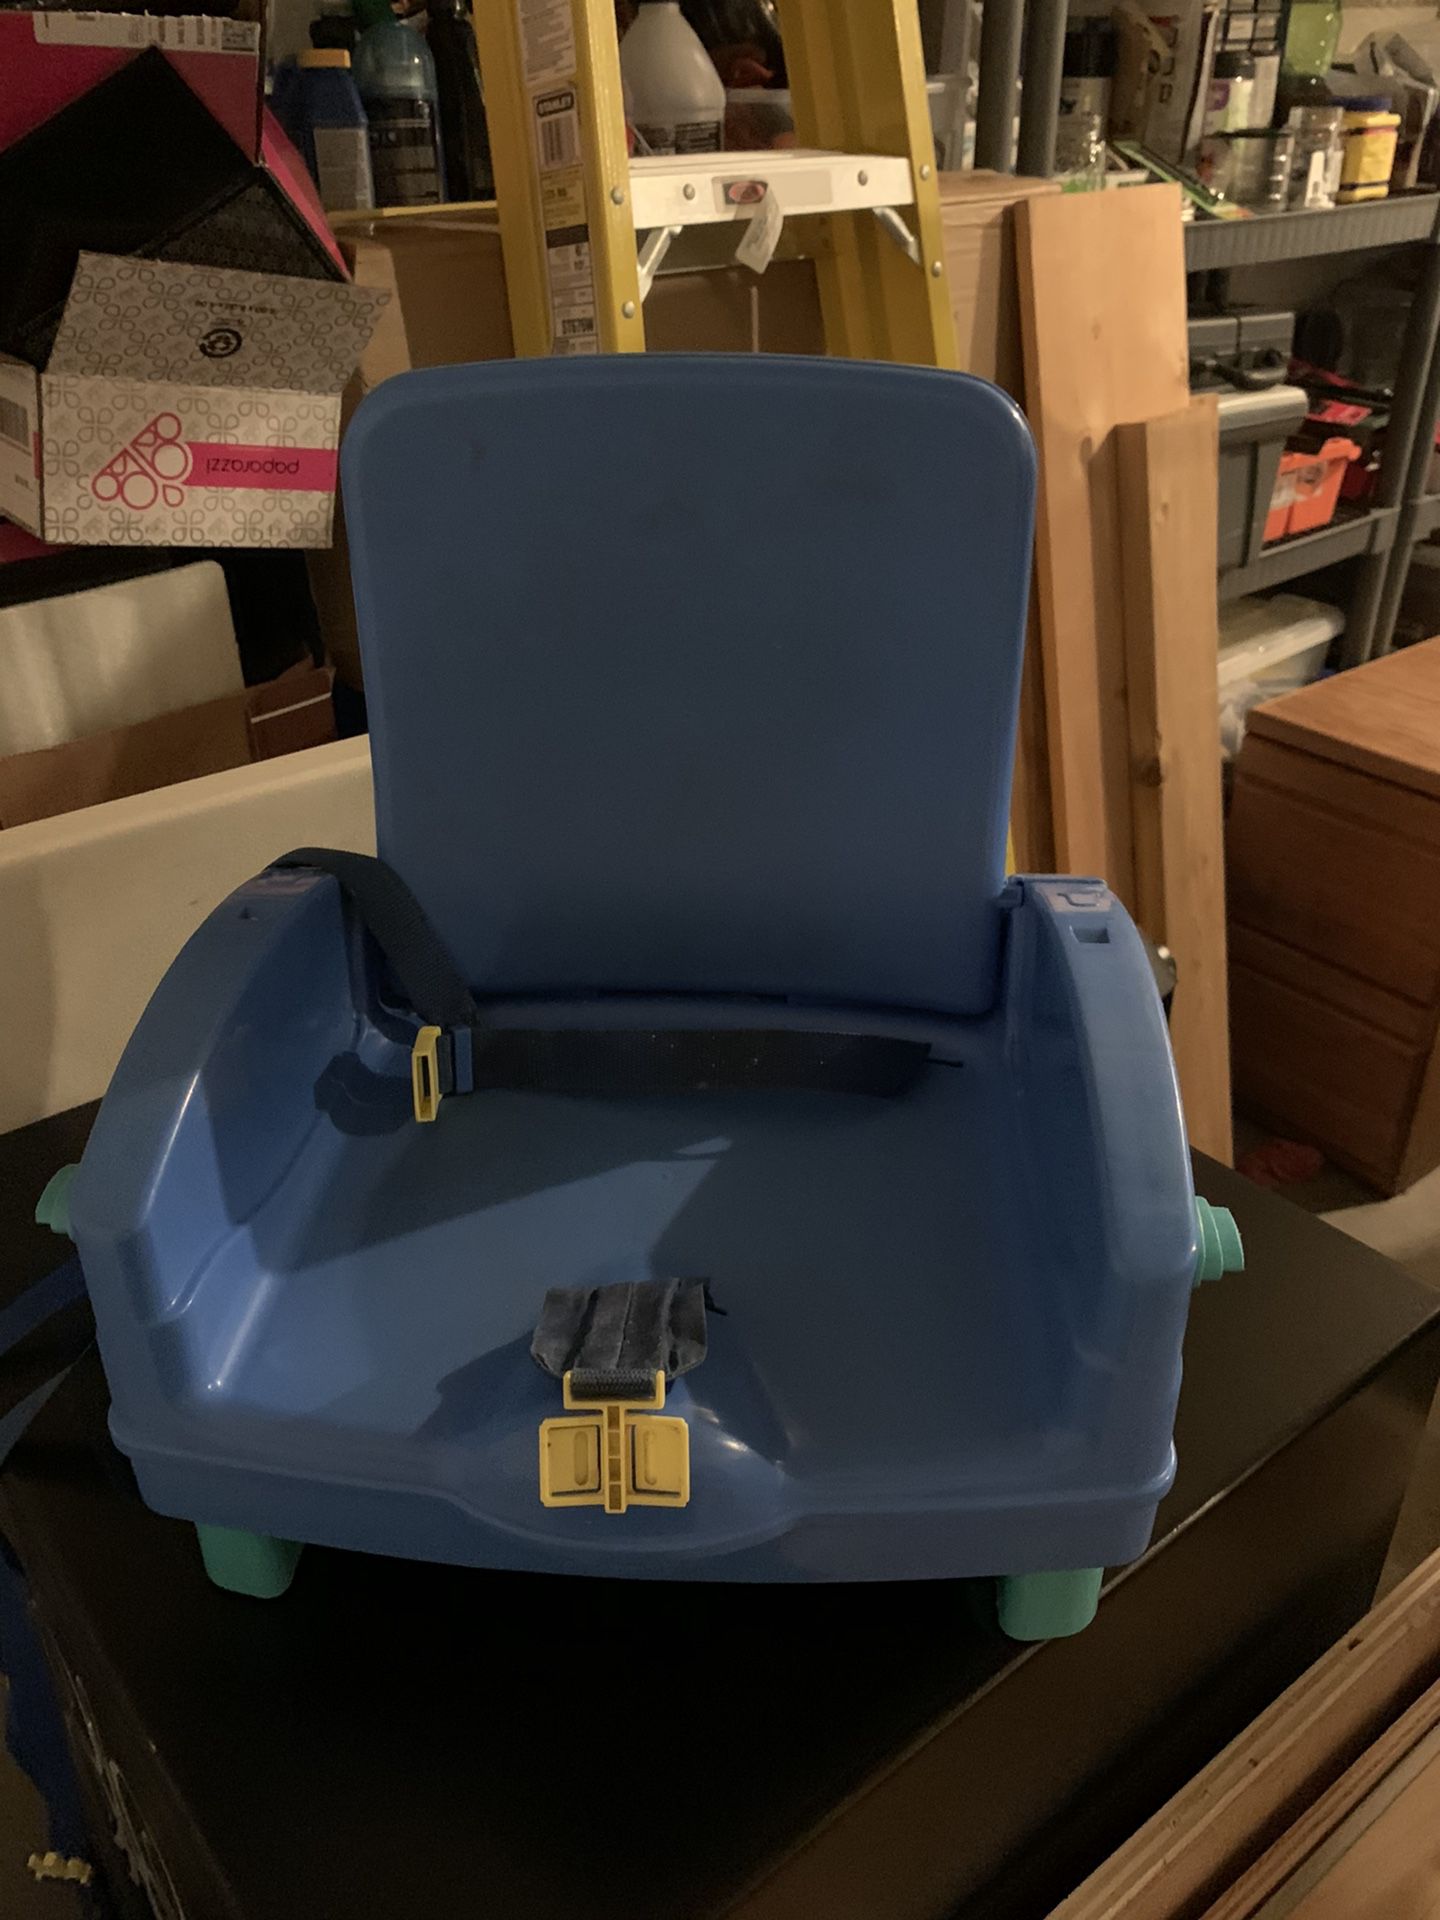 Cosco booster seat